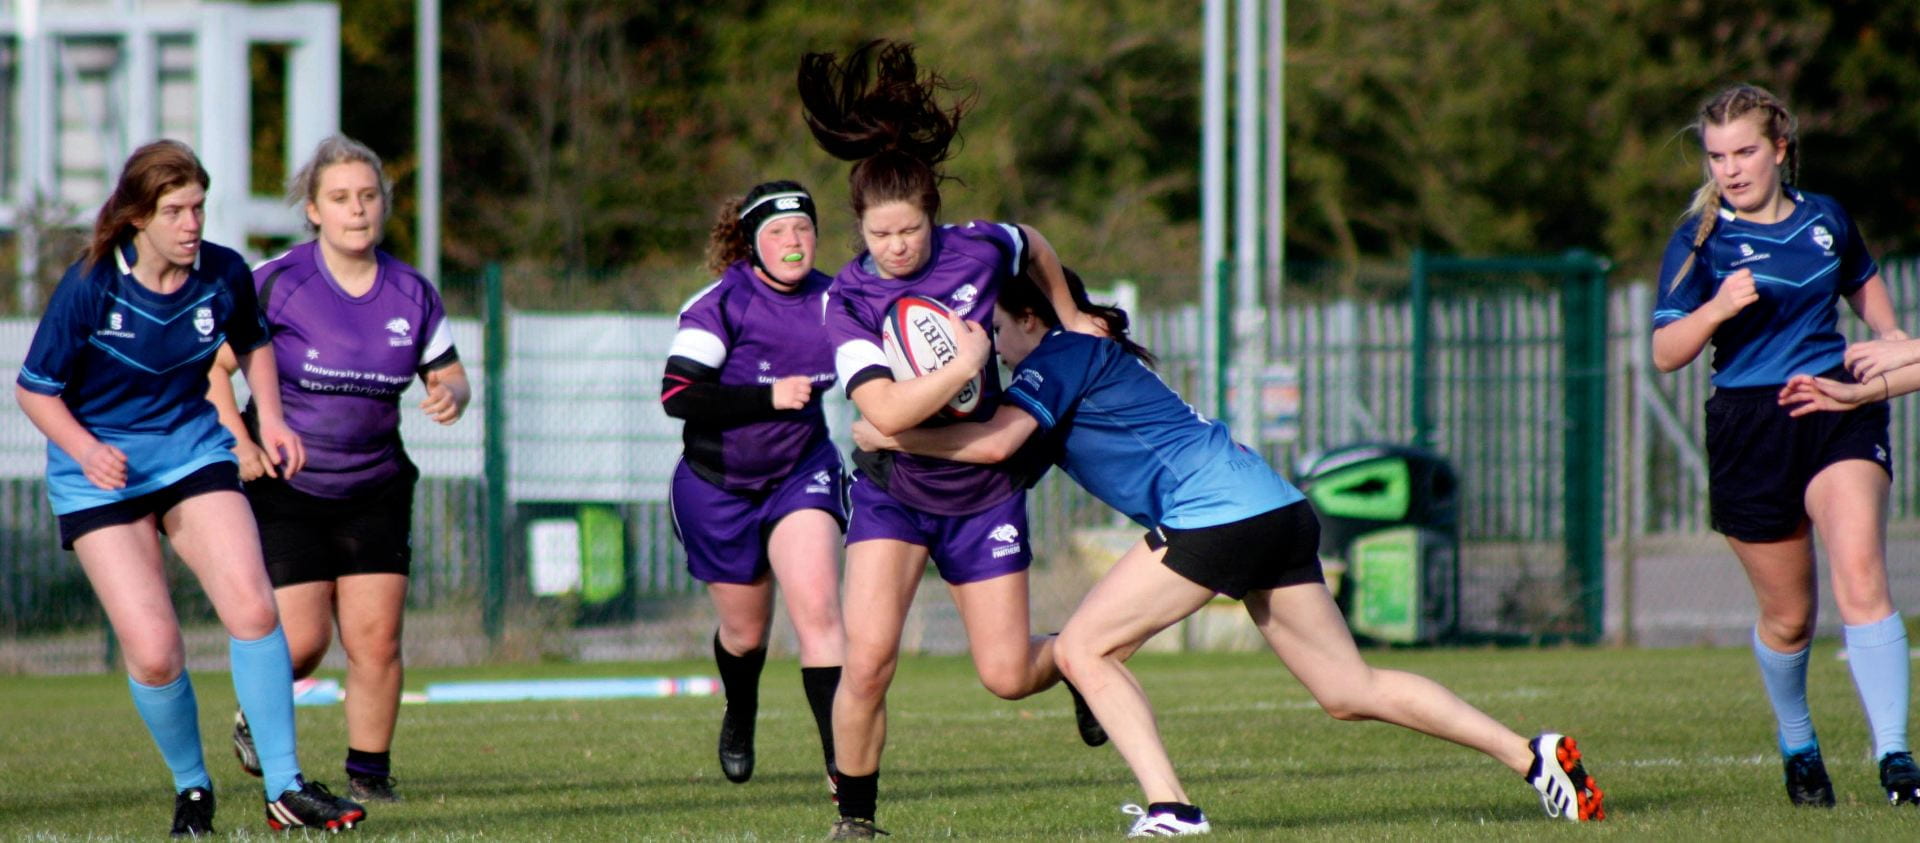 Women playing rugby.